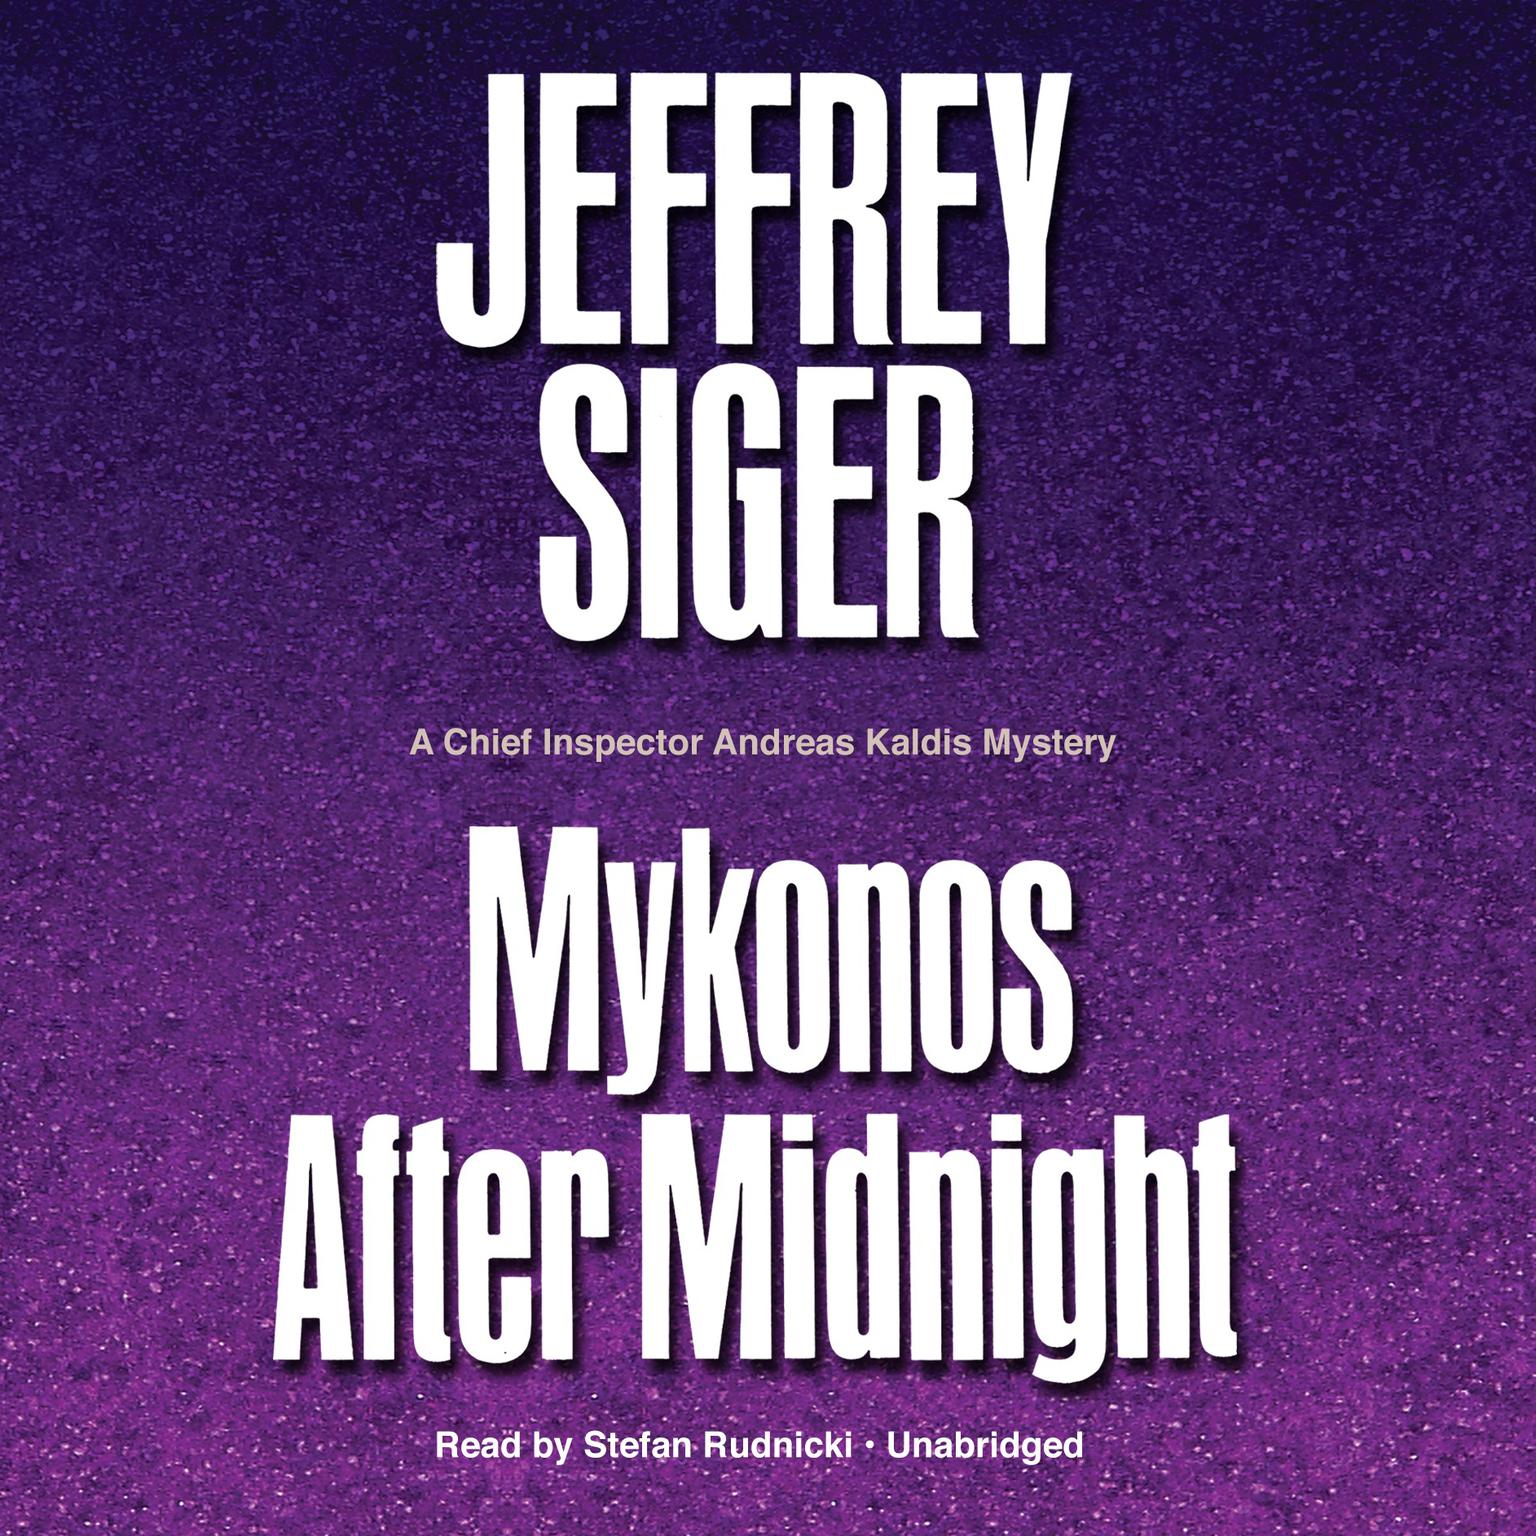 Mykonos after Midnight: A Chief Inspector Andreas Kaldis Mystery Audiobook, by Jeffrey Siger